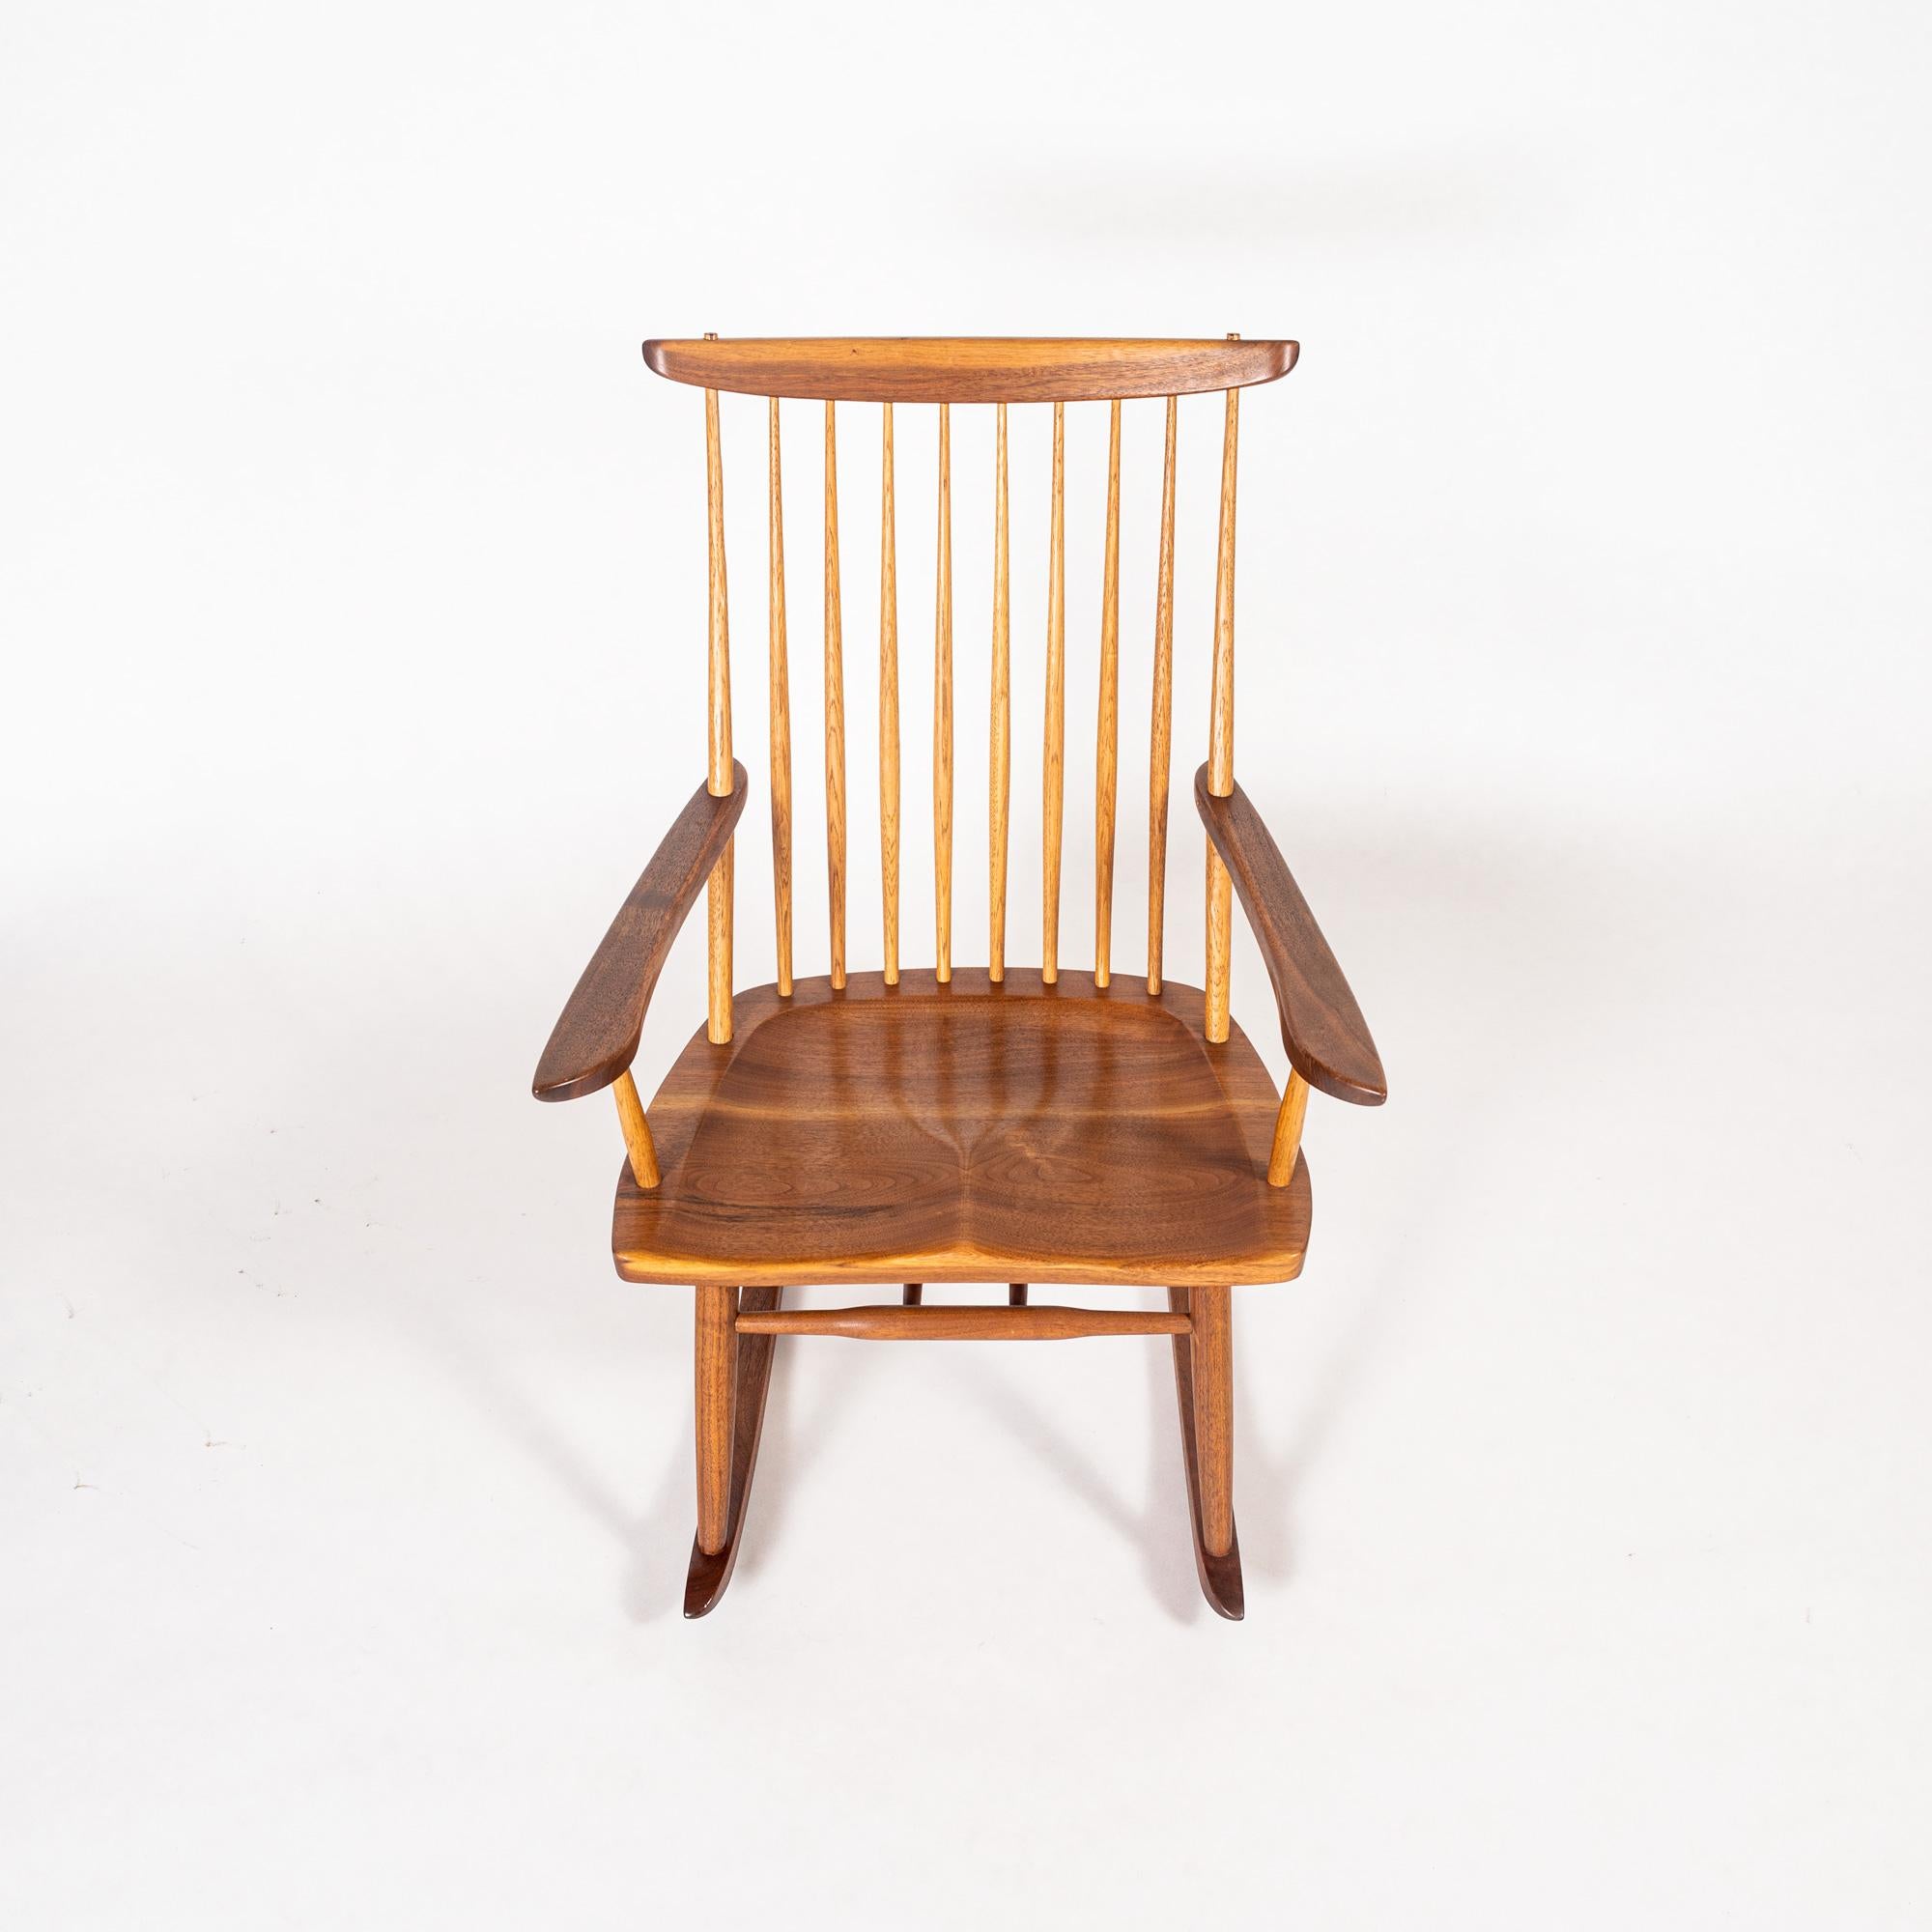 A pair of rocker in walnut with hickory spindles and sculpted arms by George Nakashima, circa 1970s. Client name marked on underside. A Washington State native, master woodworker and M.I.T.-trained architect, George Nakashima was the leading light